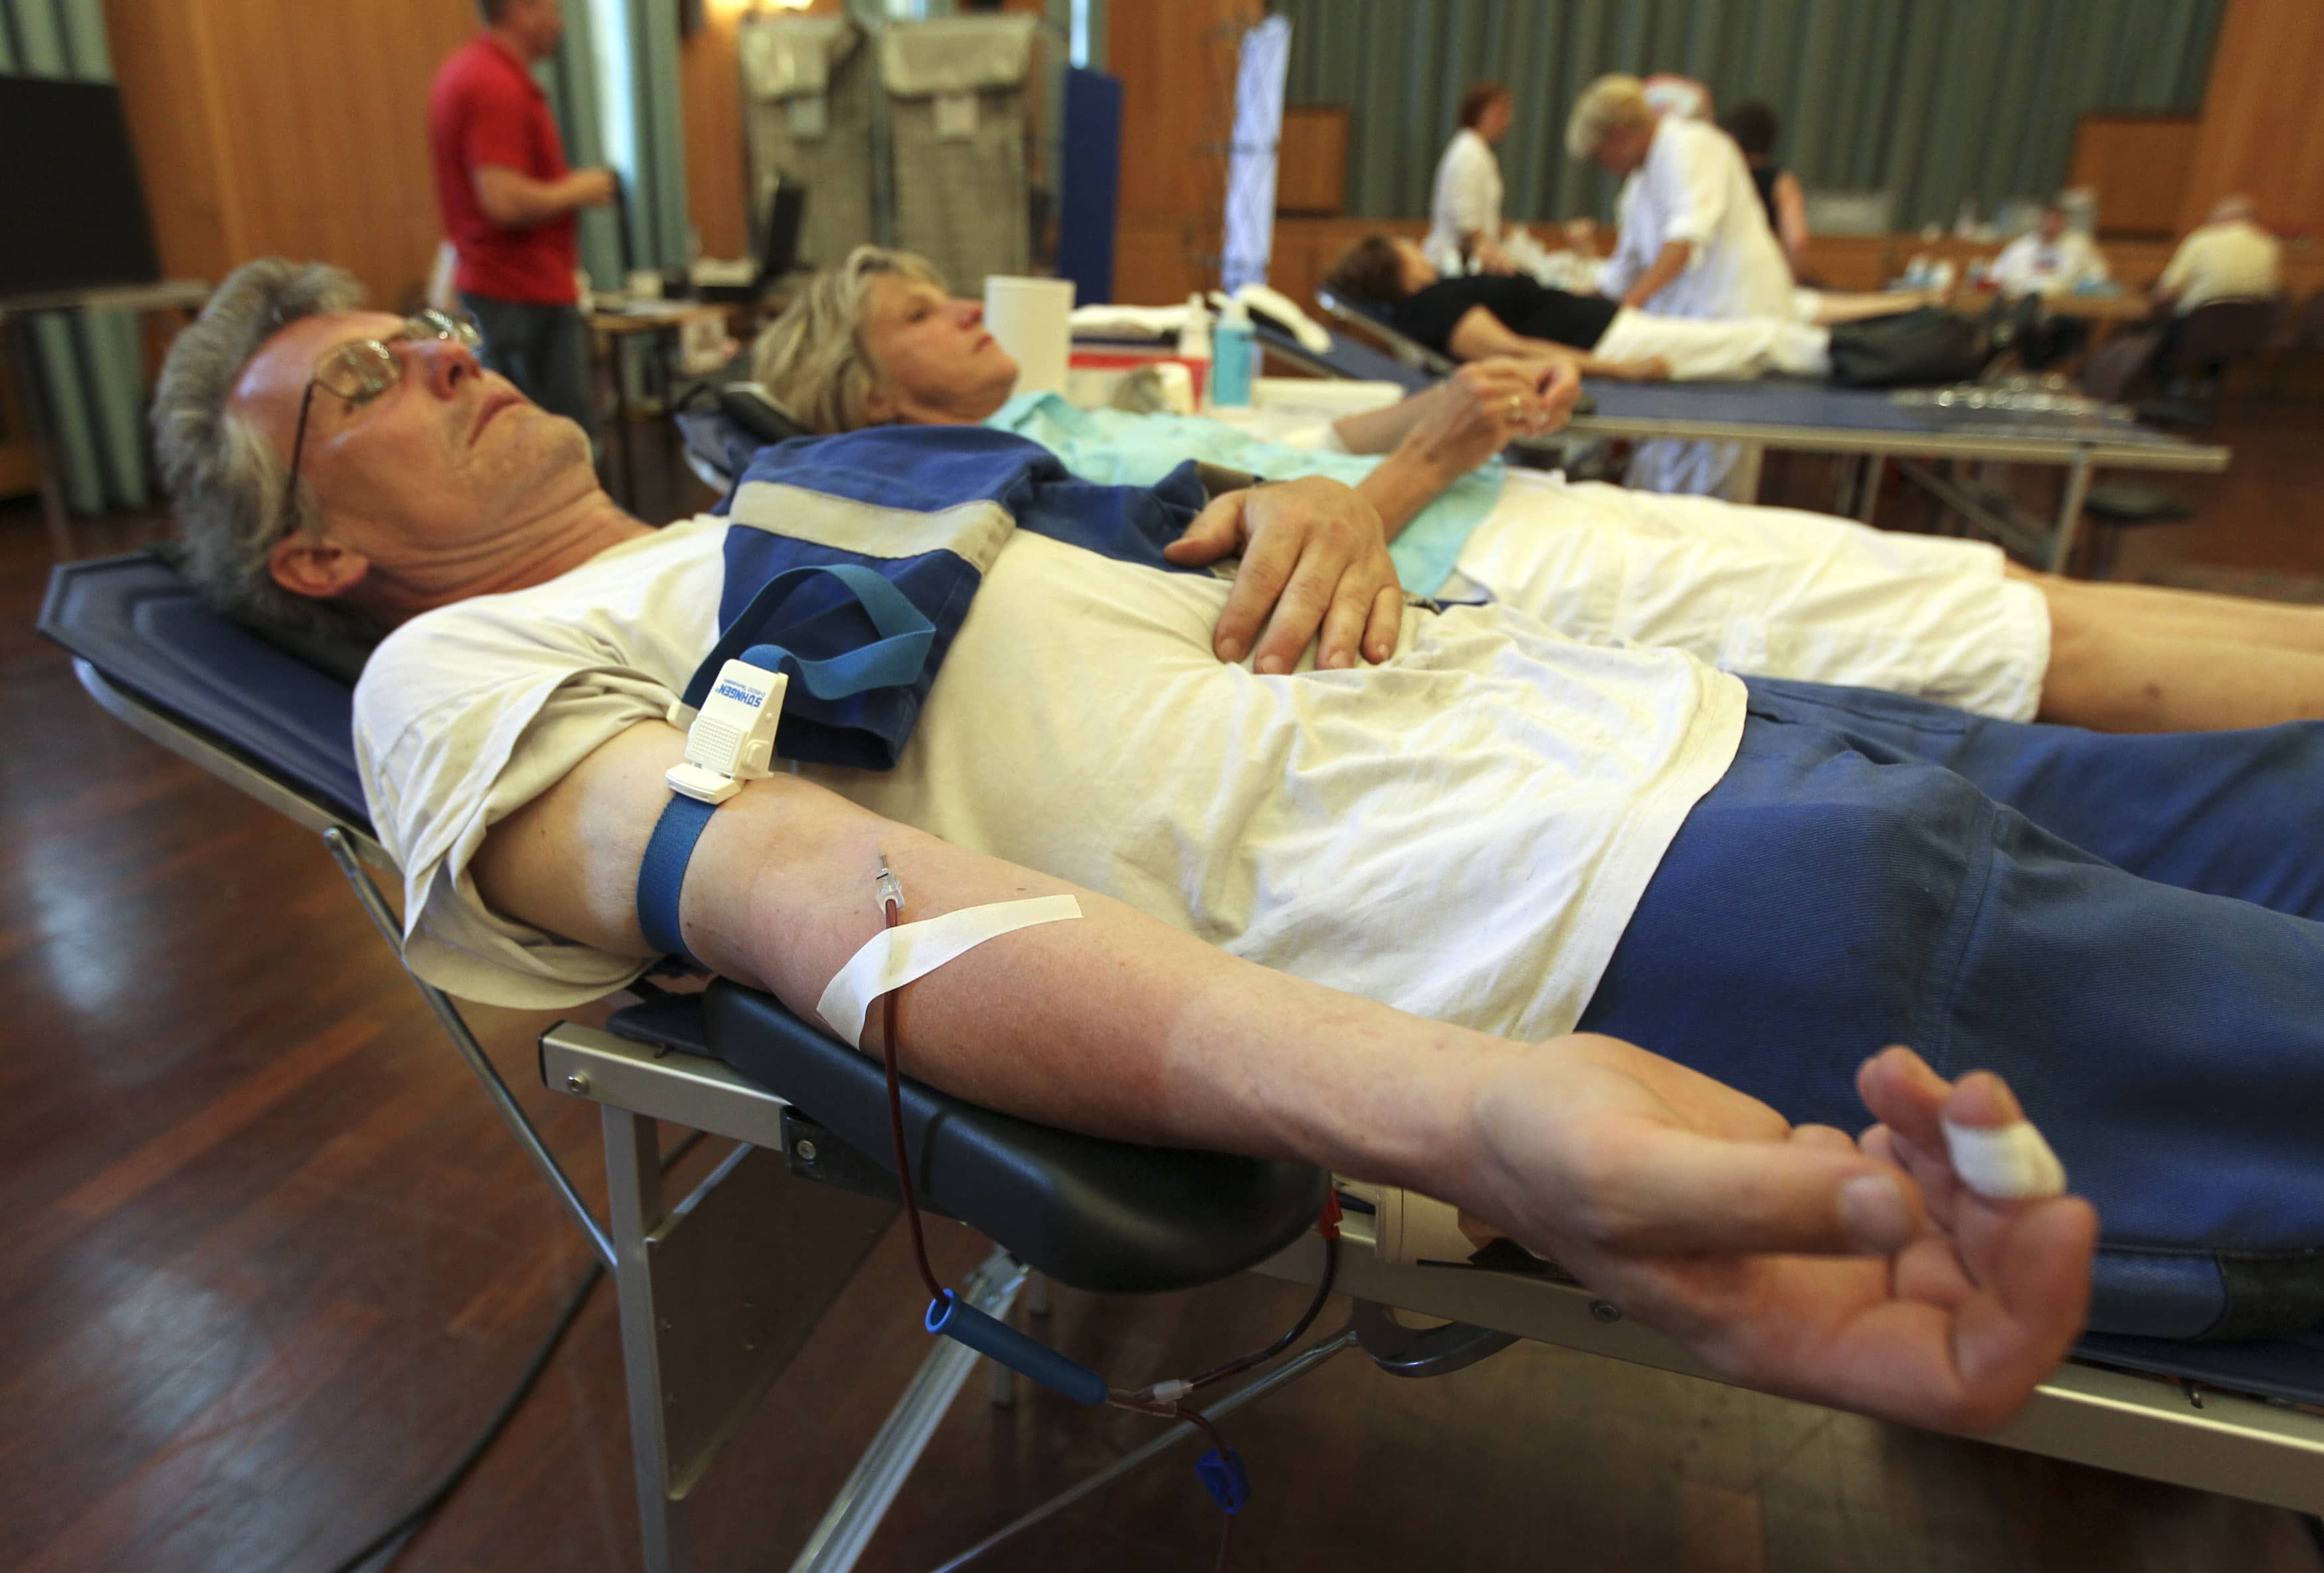 people-donate-blood-at-a-blood-drive-of-the-german-red-cross-in-berlin